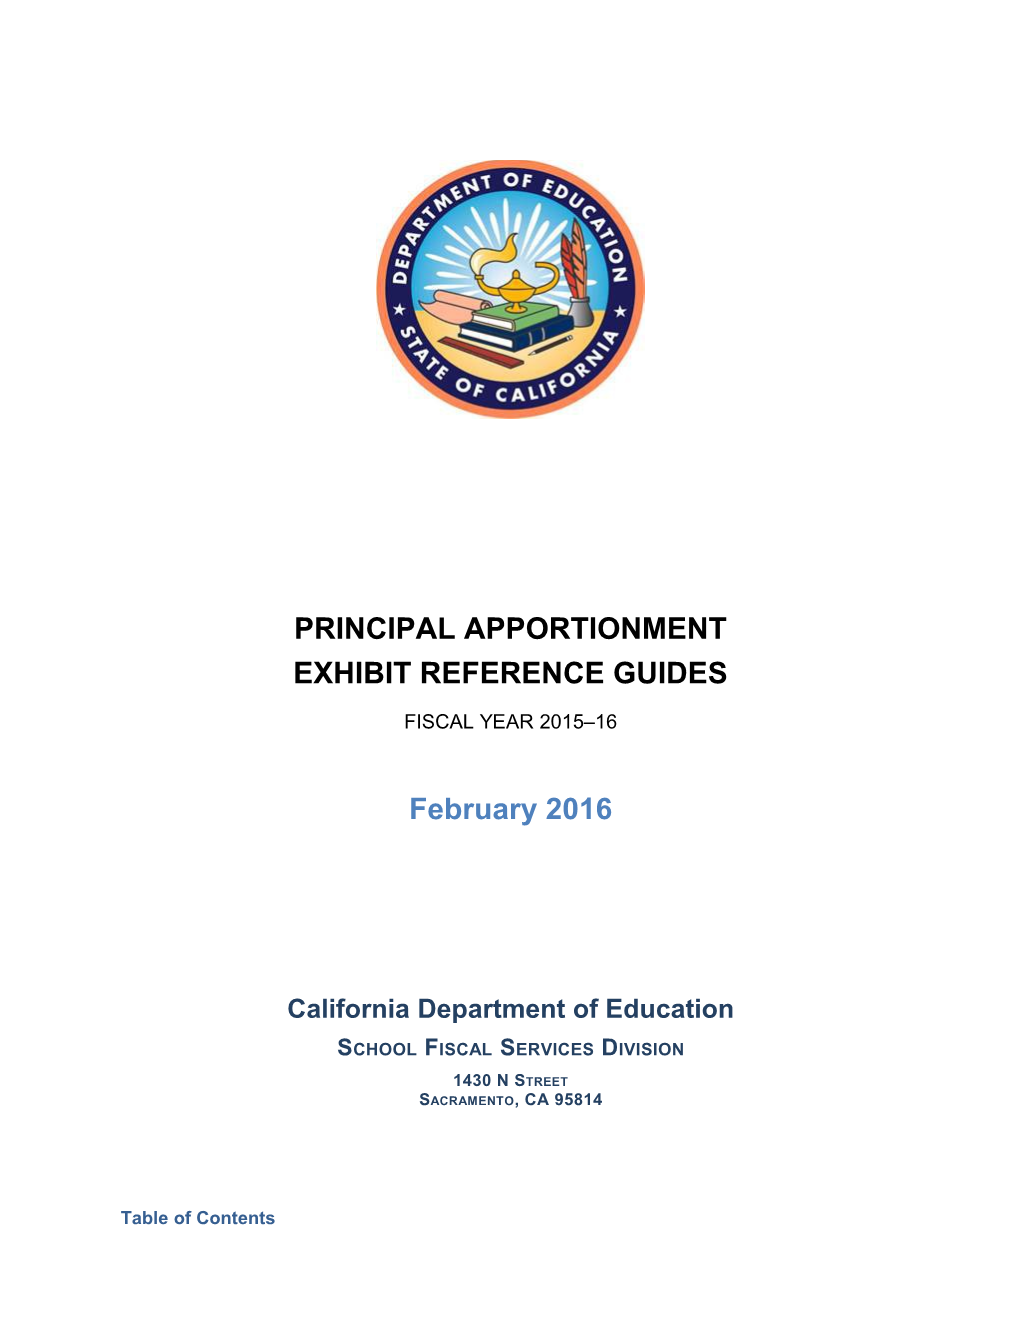 Exhibit Reference Guide, FY 2015-16 - Principal Apportionment (CA Dept of Education)